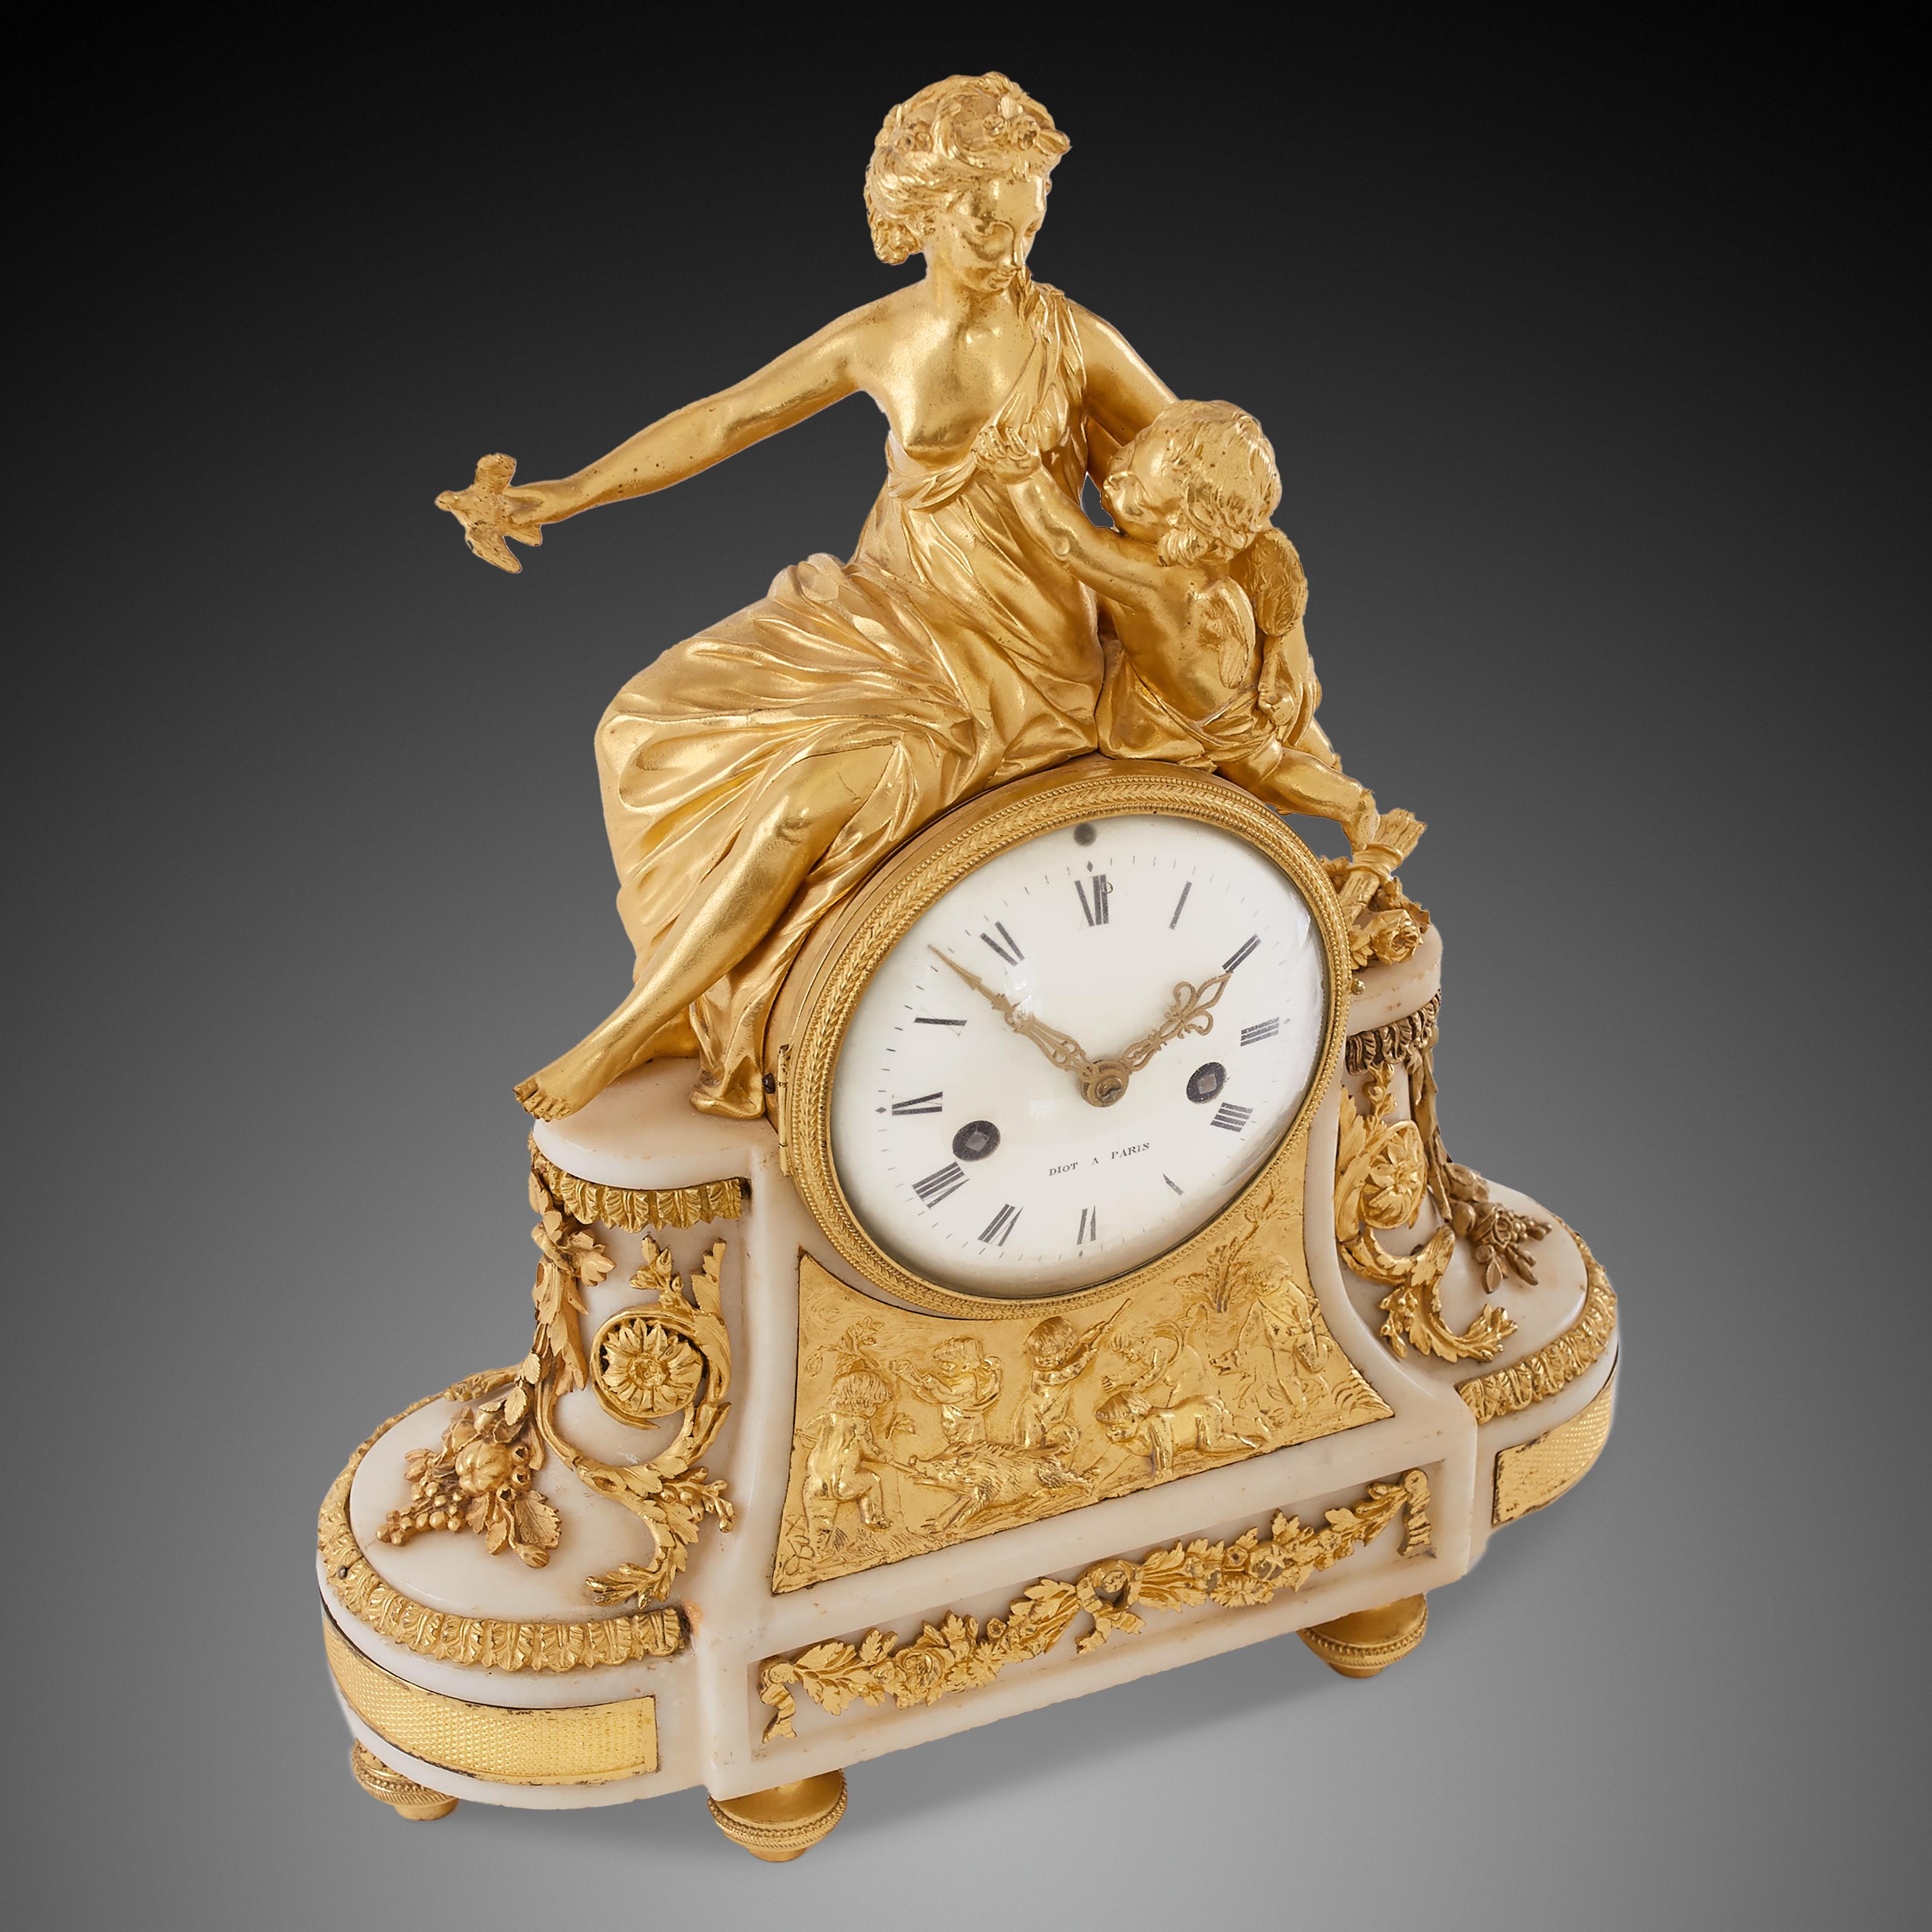 French Mantel Clock 18th Century Louis XV Period by Diot À Paris For Sale